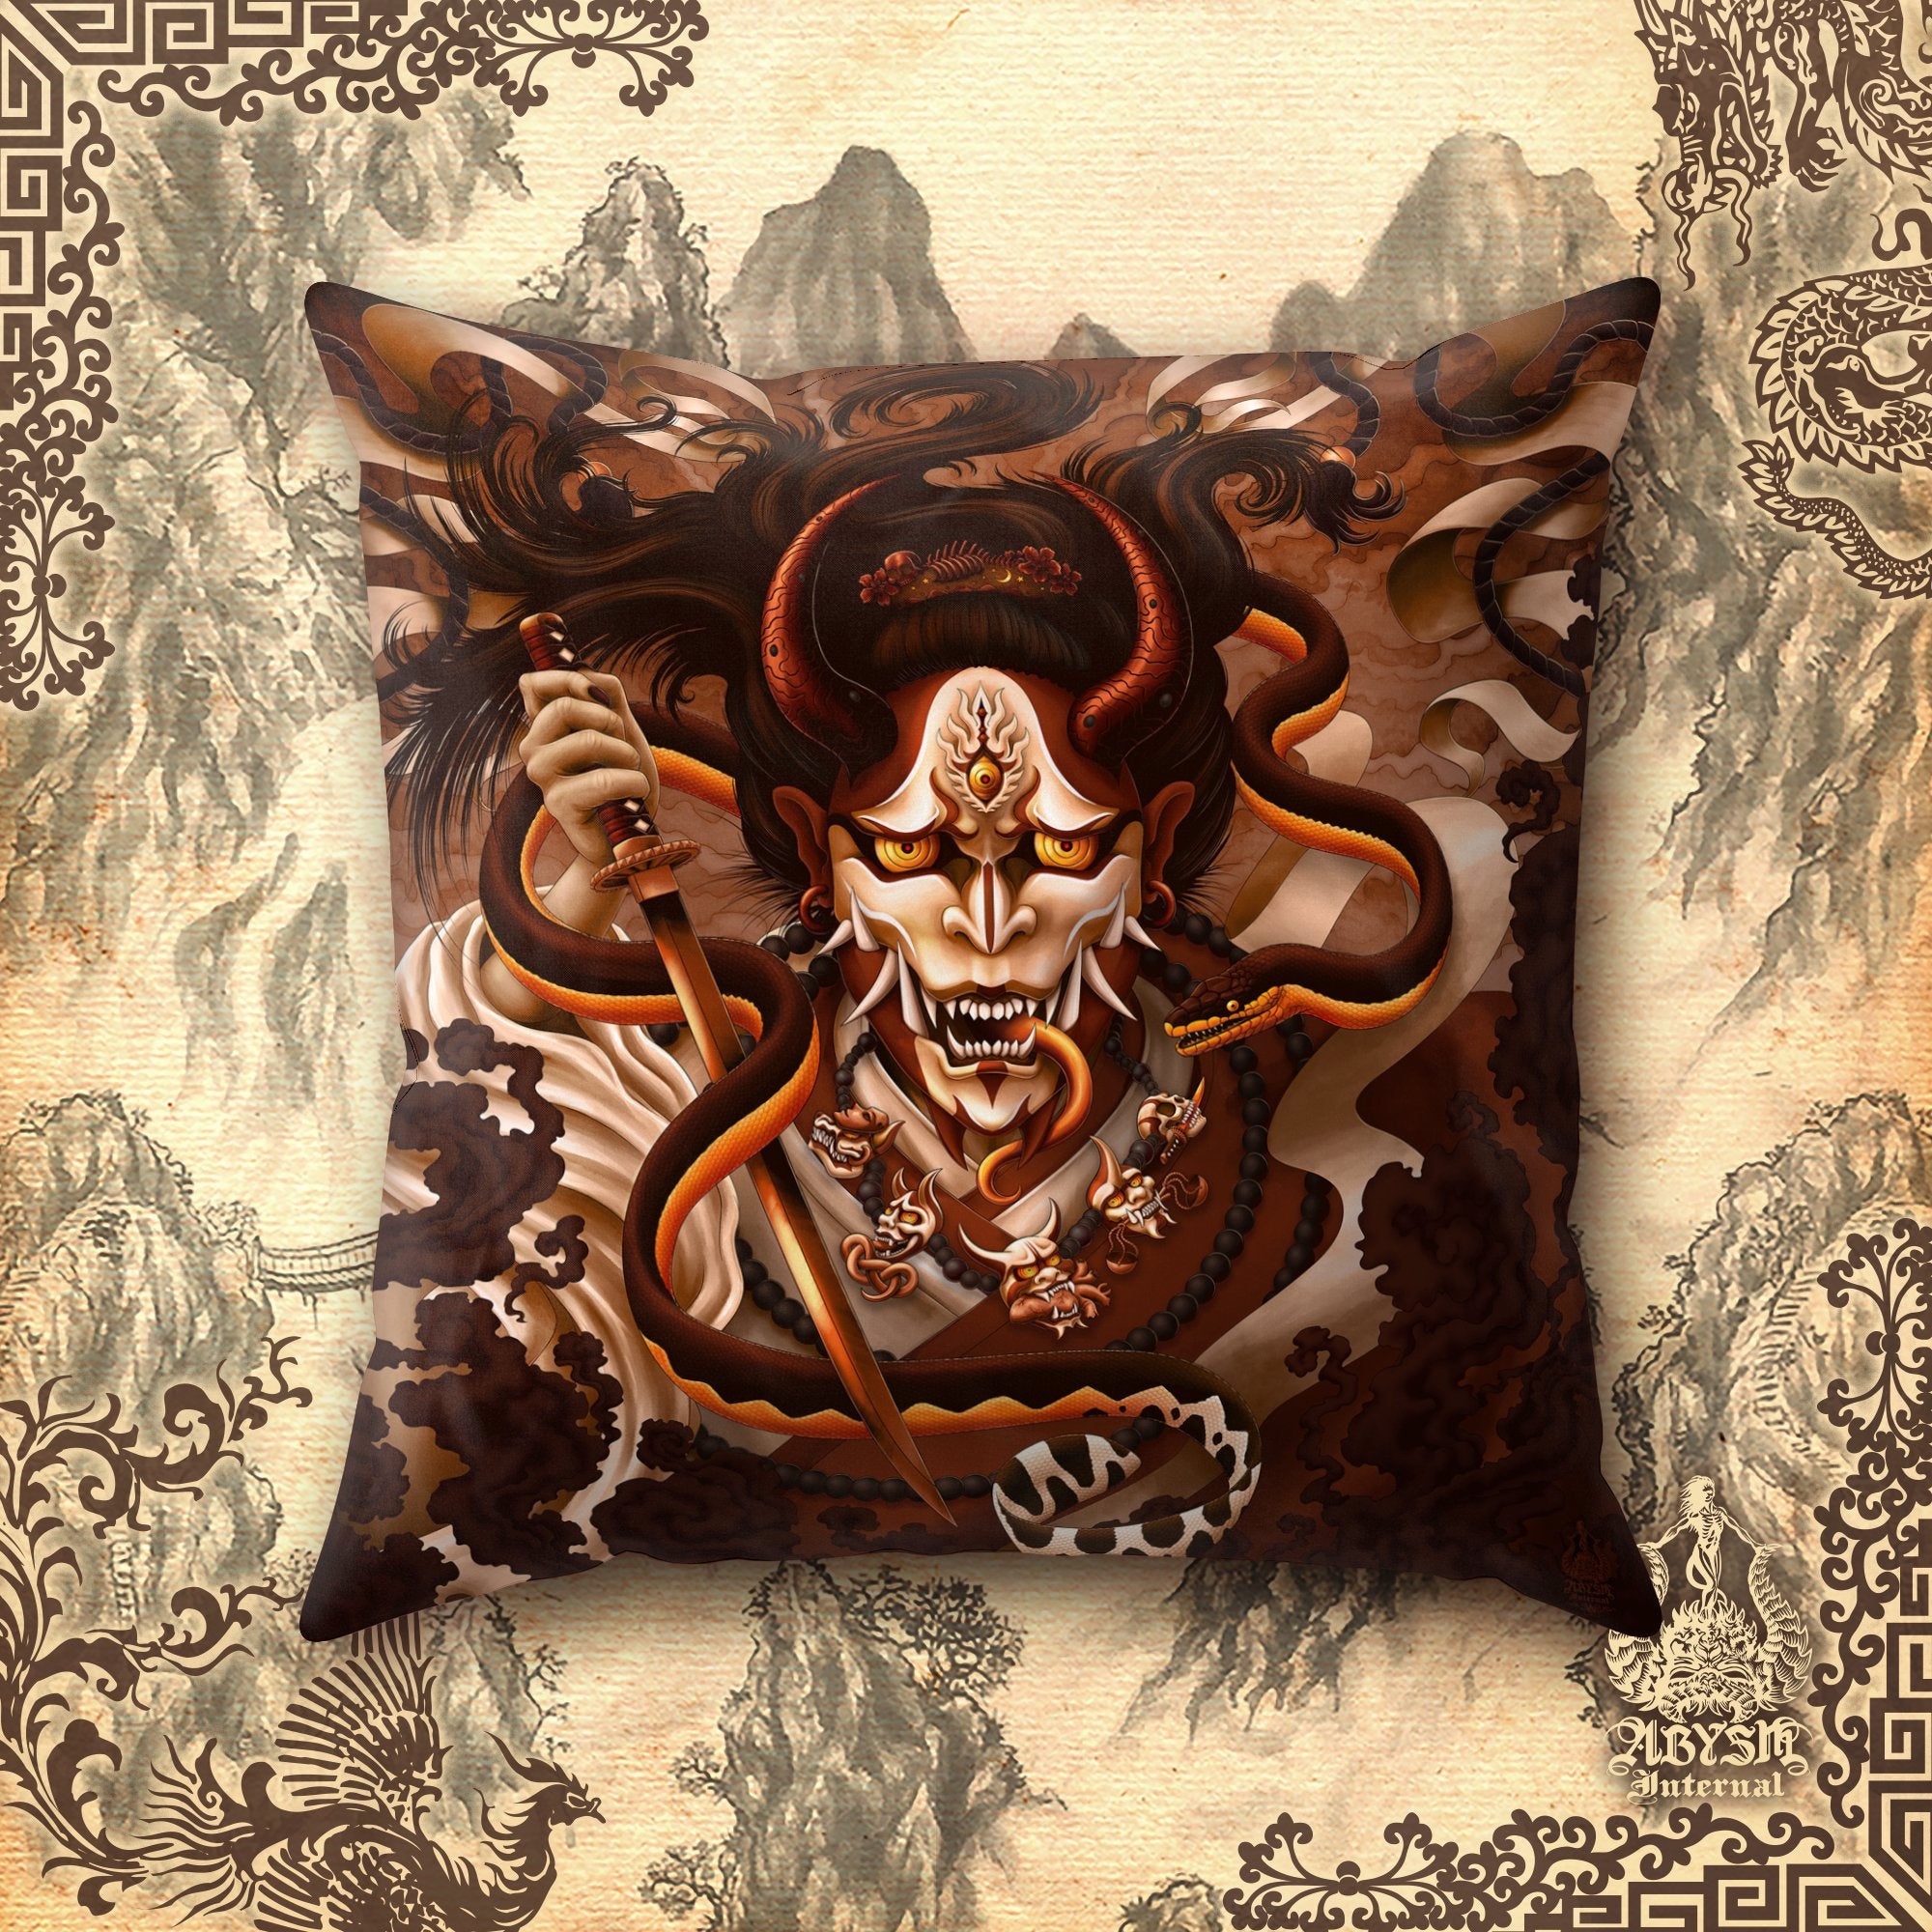 Hannya Throw Pillow, Decorative Accent Pillow, Square Cushion Cover, Japanese Demon & Snake, Gamer Room Decor - Cream - Abysm Internal